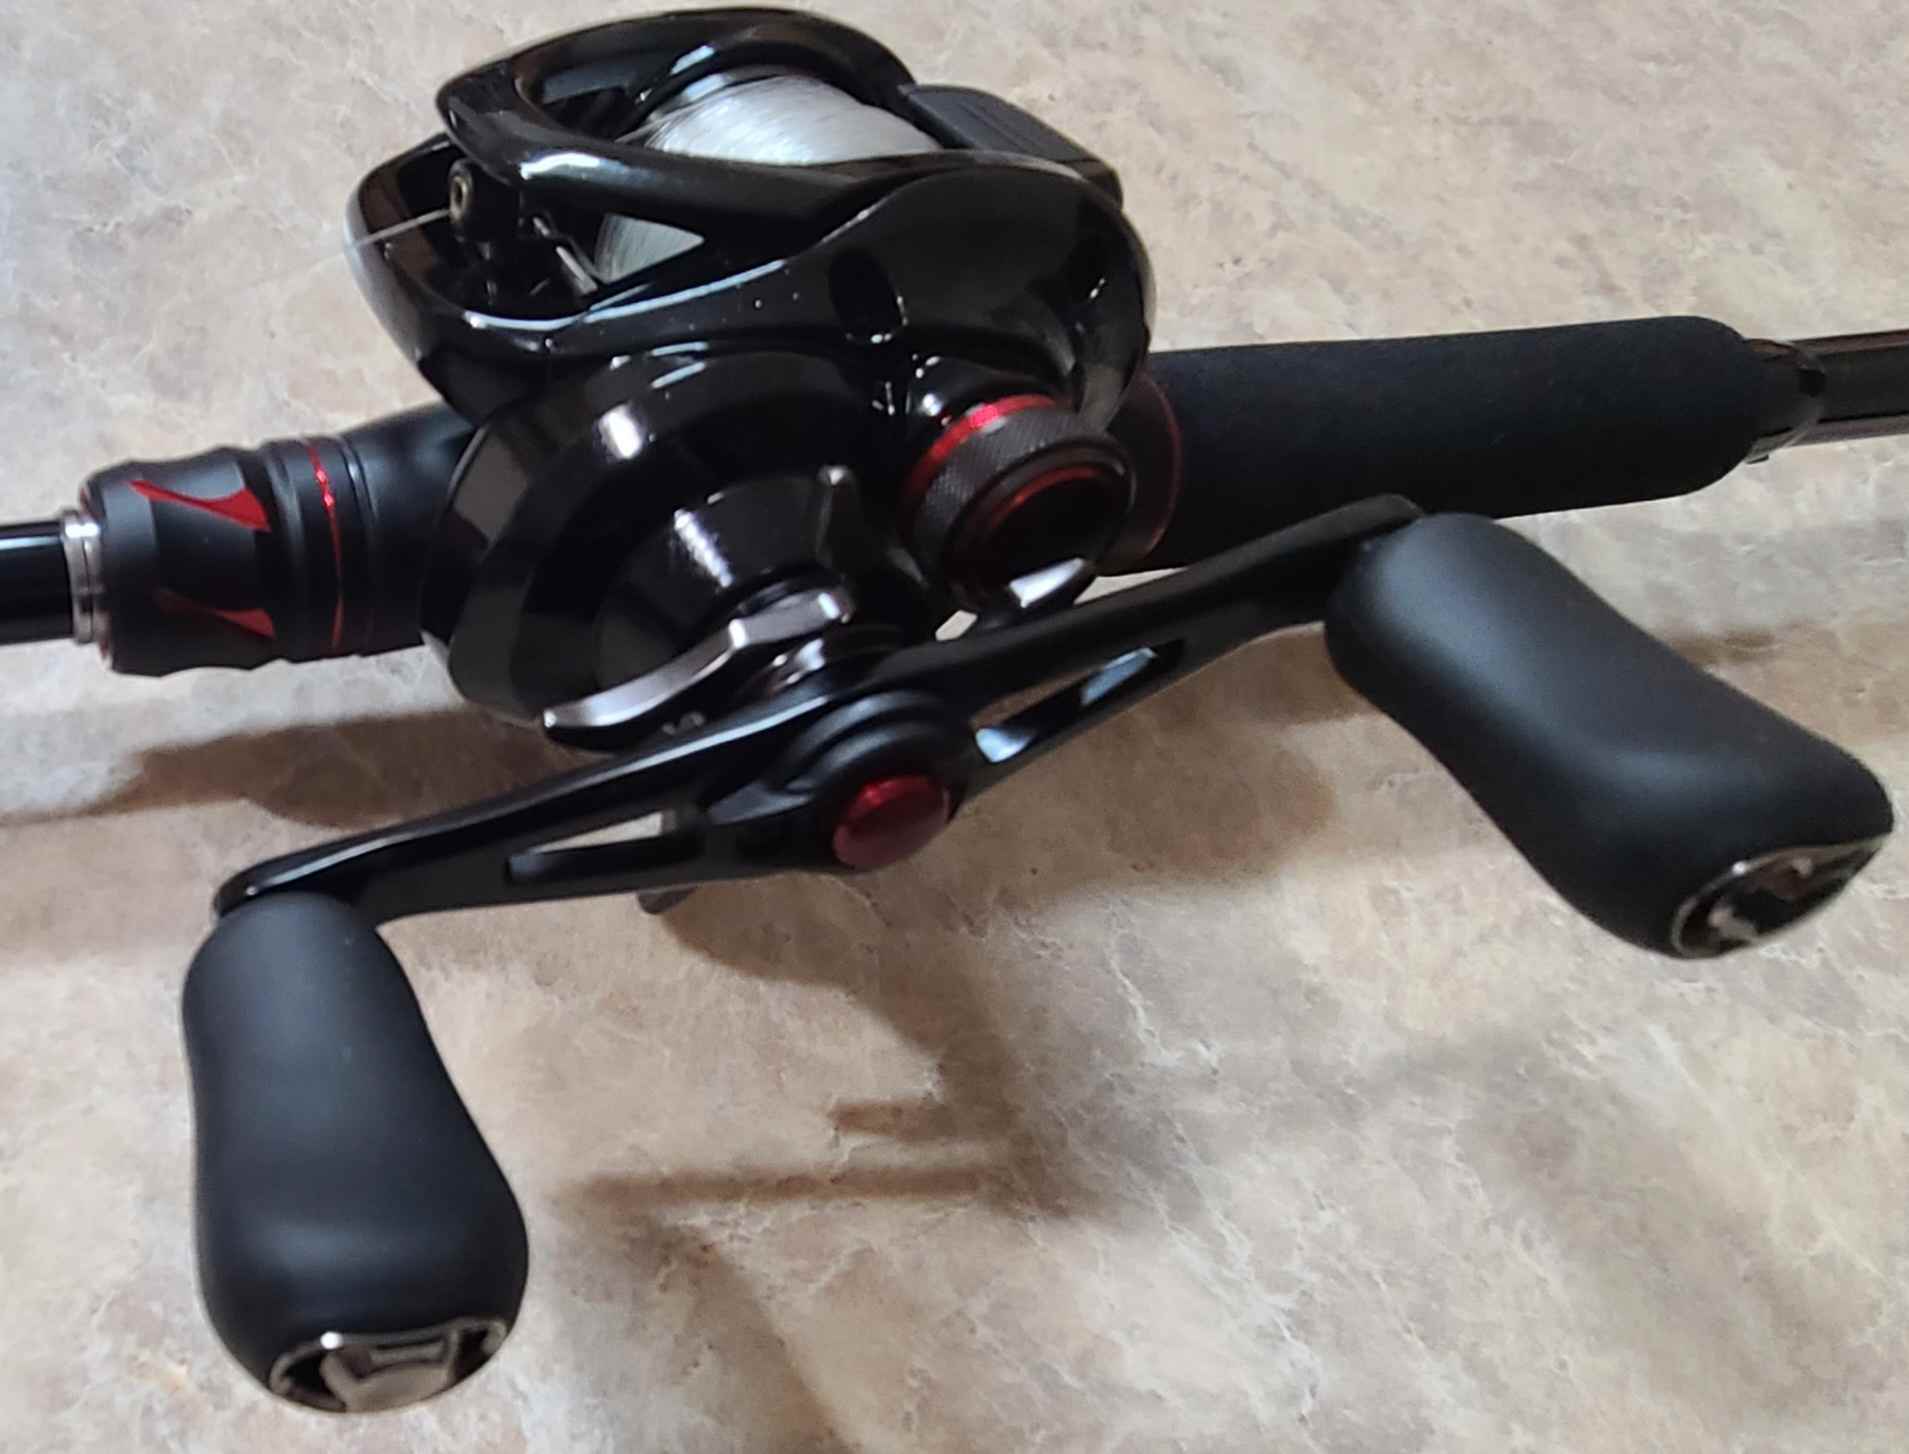 New Cranking Rig Scorpion DC? - Fishing Rods, Reels, Line, and